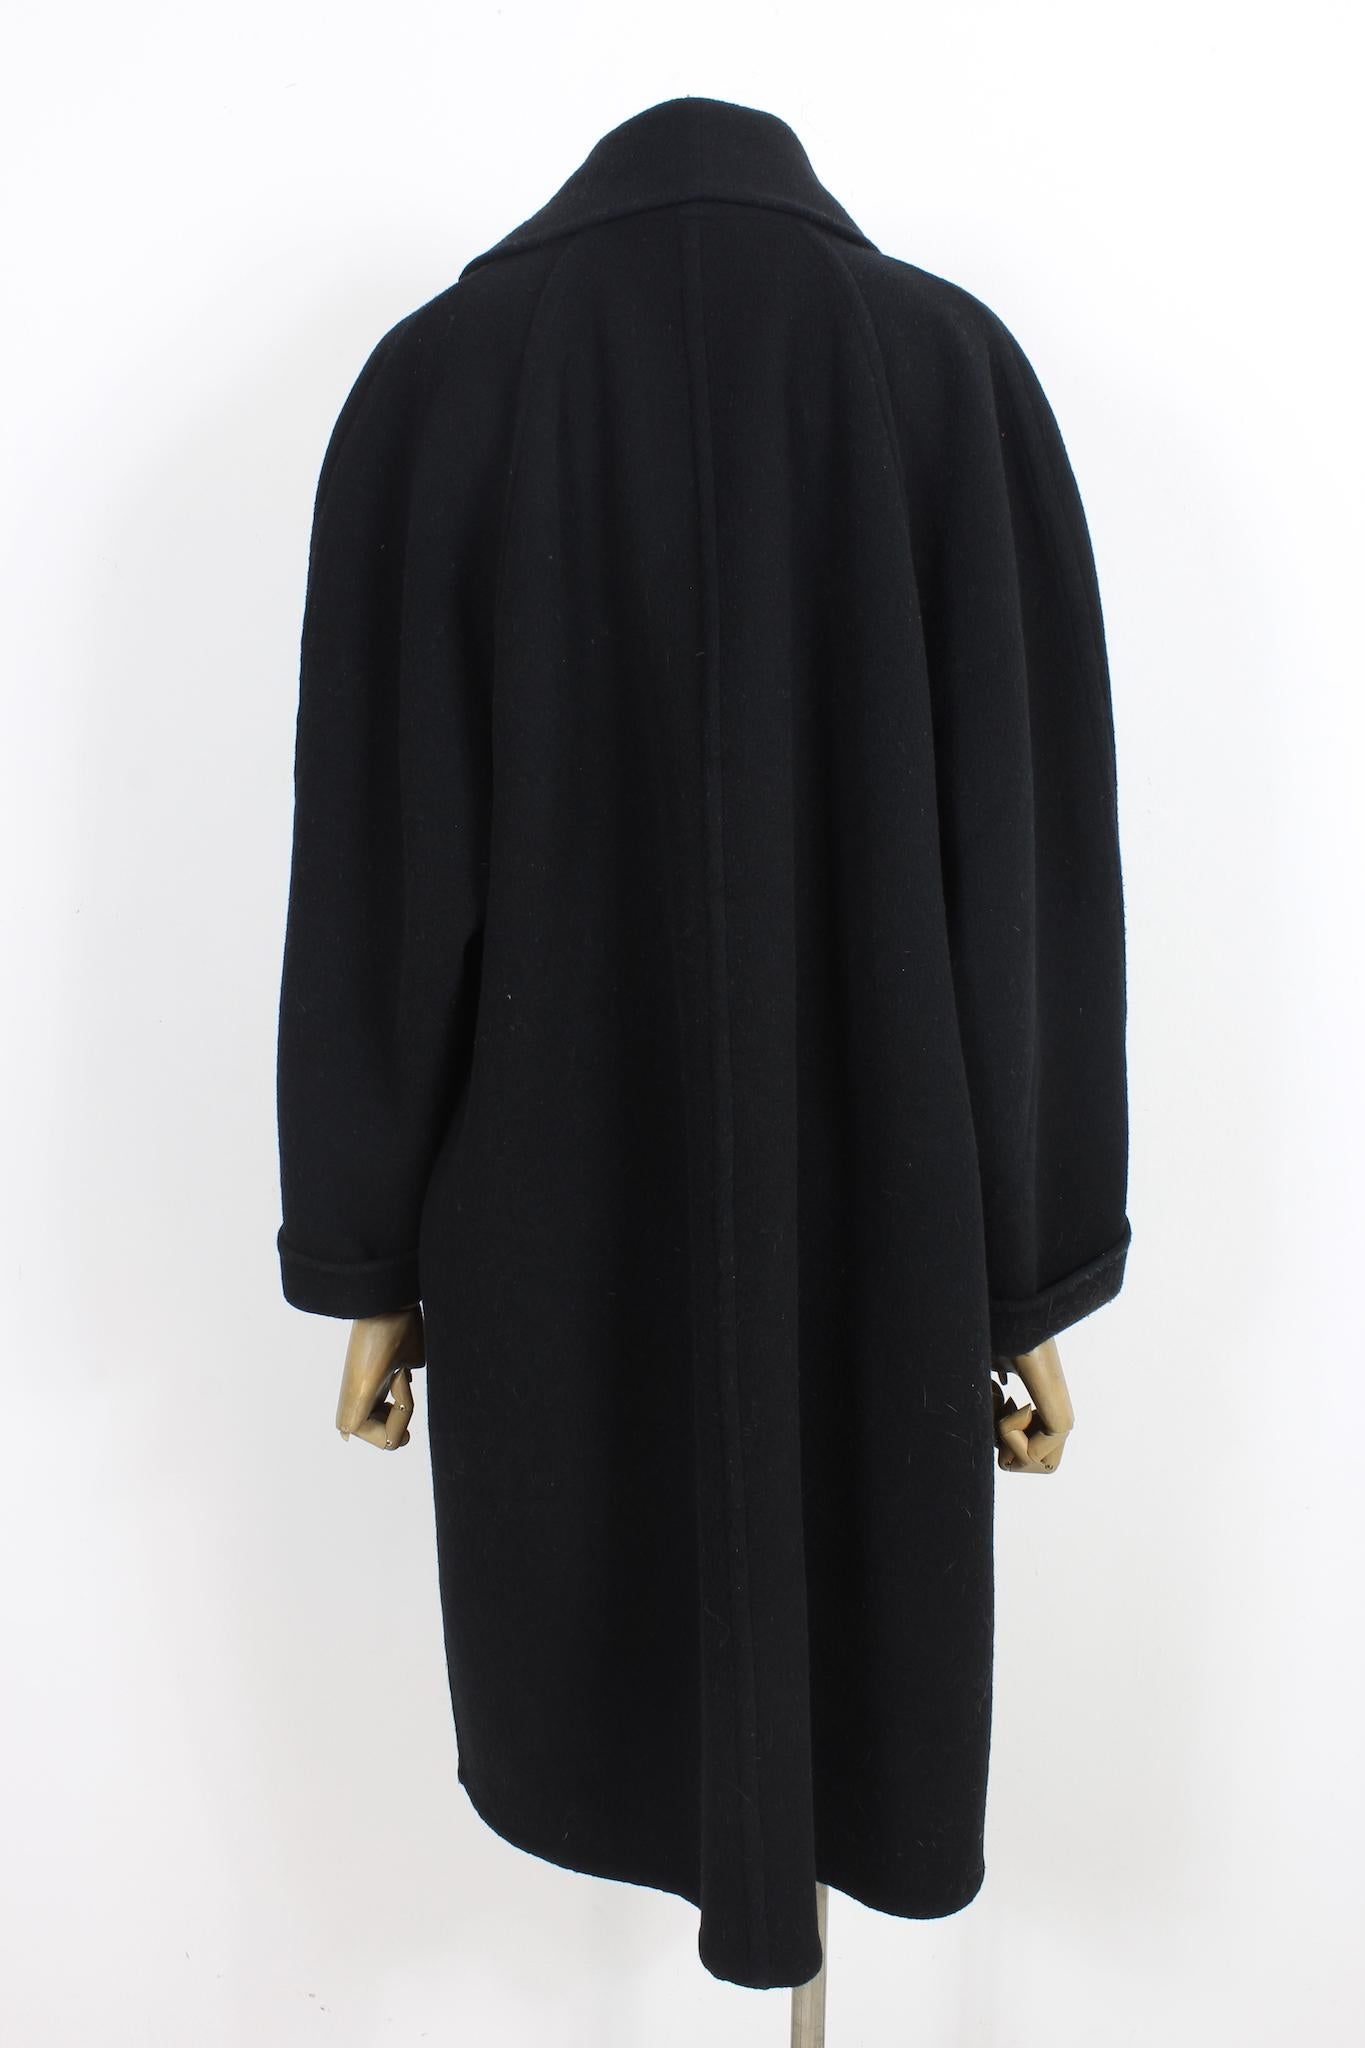 Kamanta 80s vintage oversized coat. Enveloping cape model, black colour, 100% wool fabric. Internal button closure. Made in Italy.

Size: 44 It 10 Us 12 Uk

Shoulder: 46 cm
Bust/Chest: 60 cm
Sleeve: 59 cm
Length: 112 cm